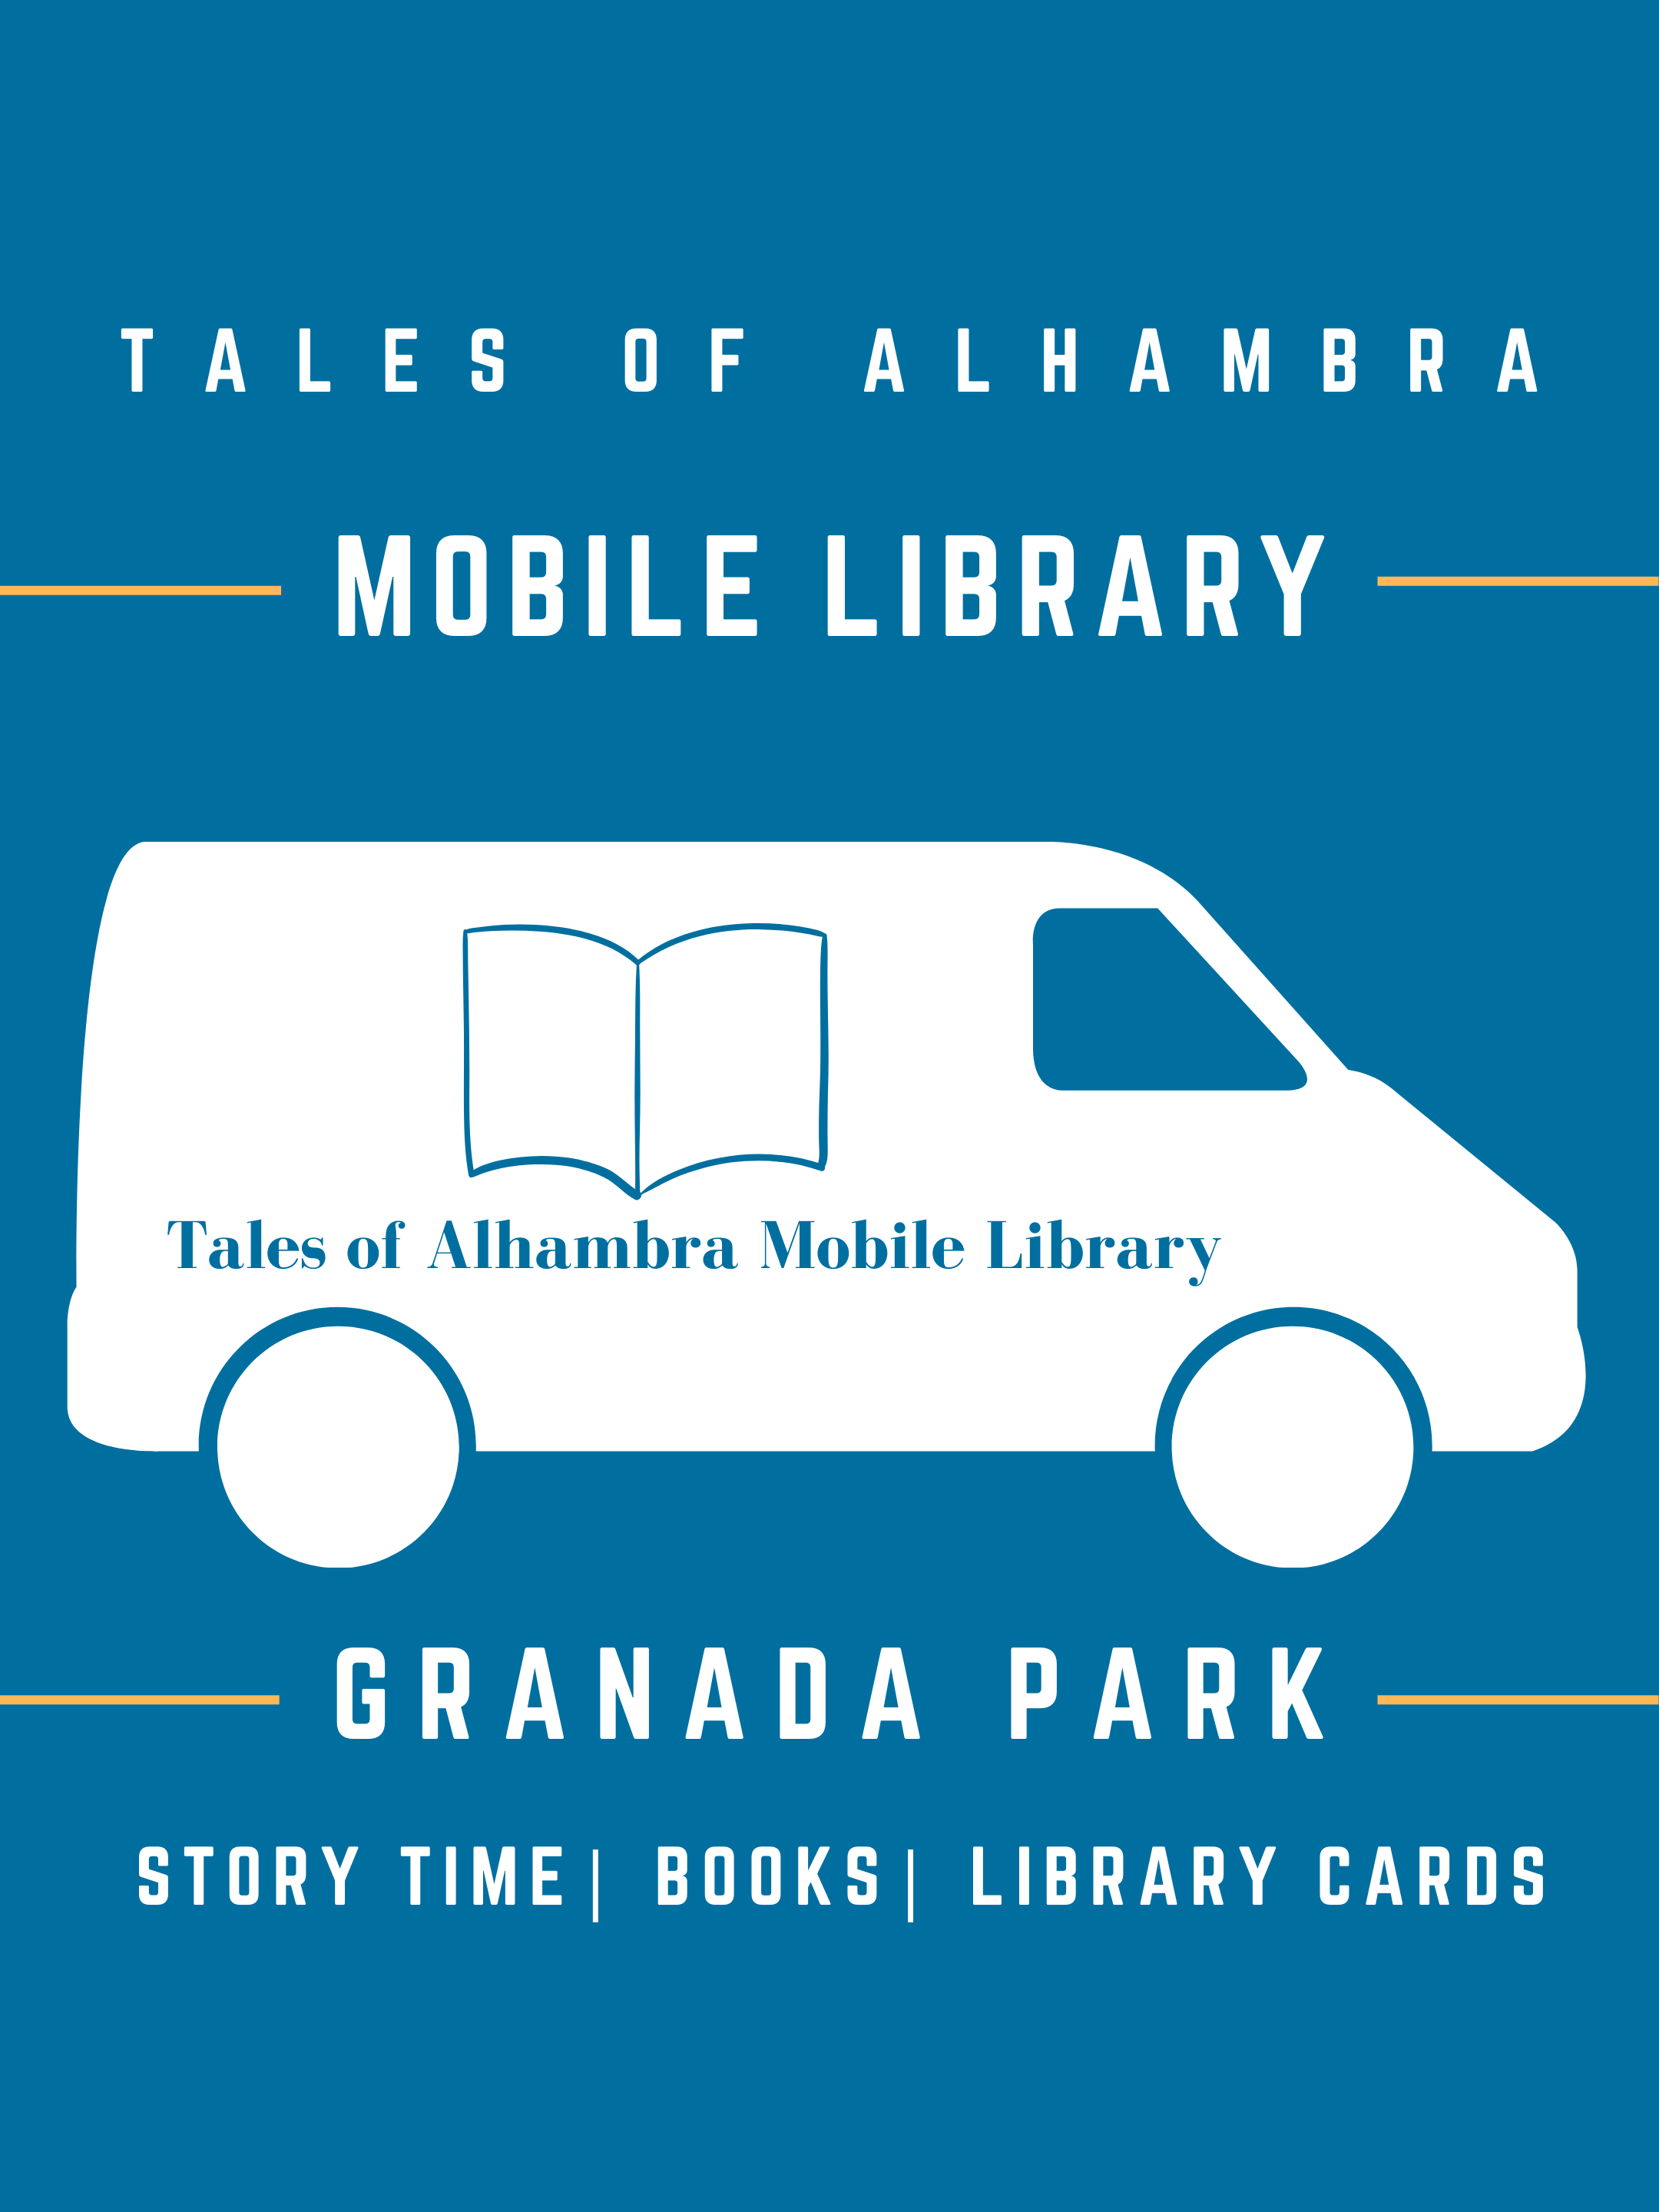 Tales of Alhambra Mobile Library